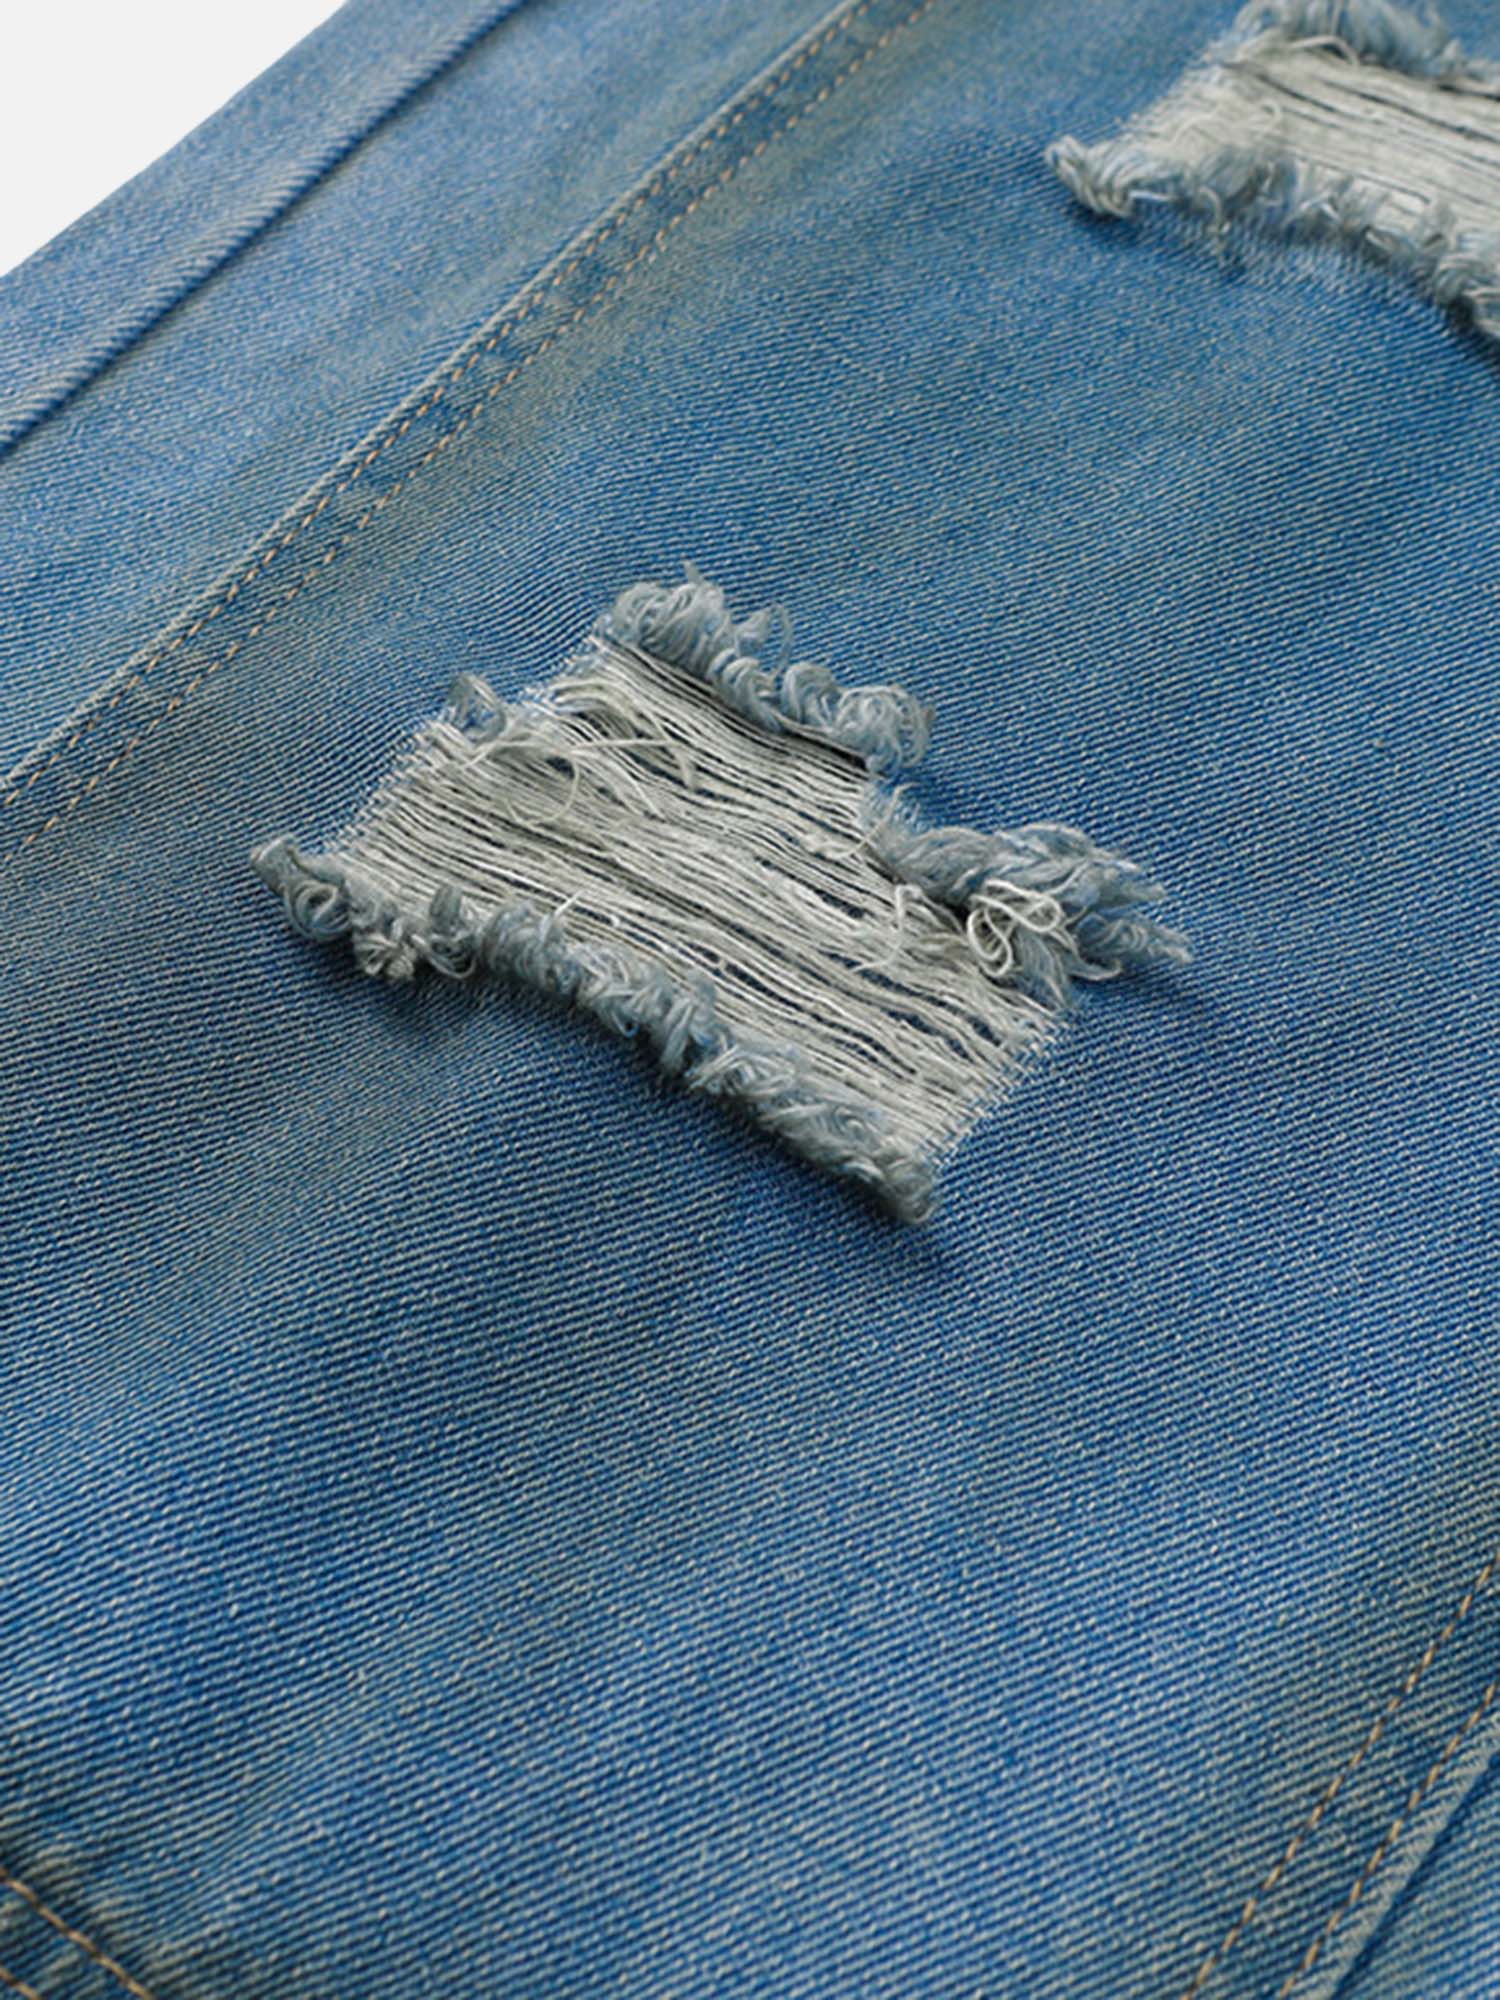 Thesupermade Street Fashion Heavy Industry Washed Distressed Jeans